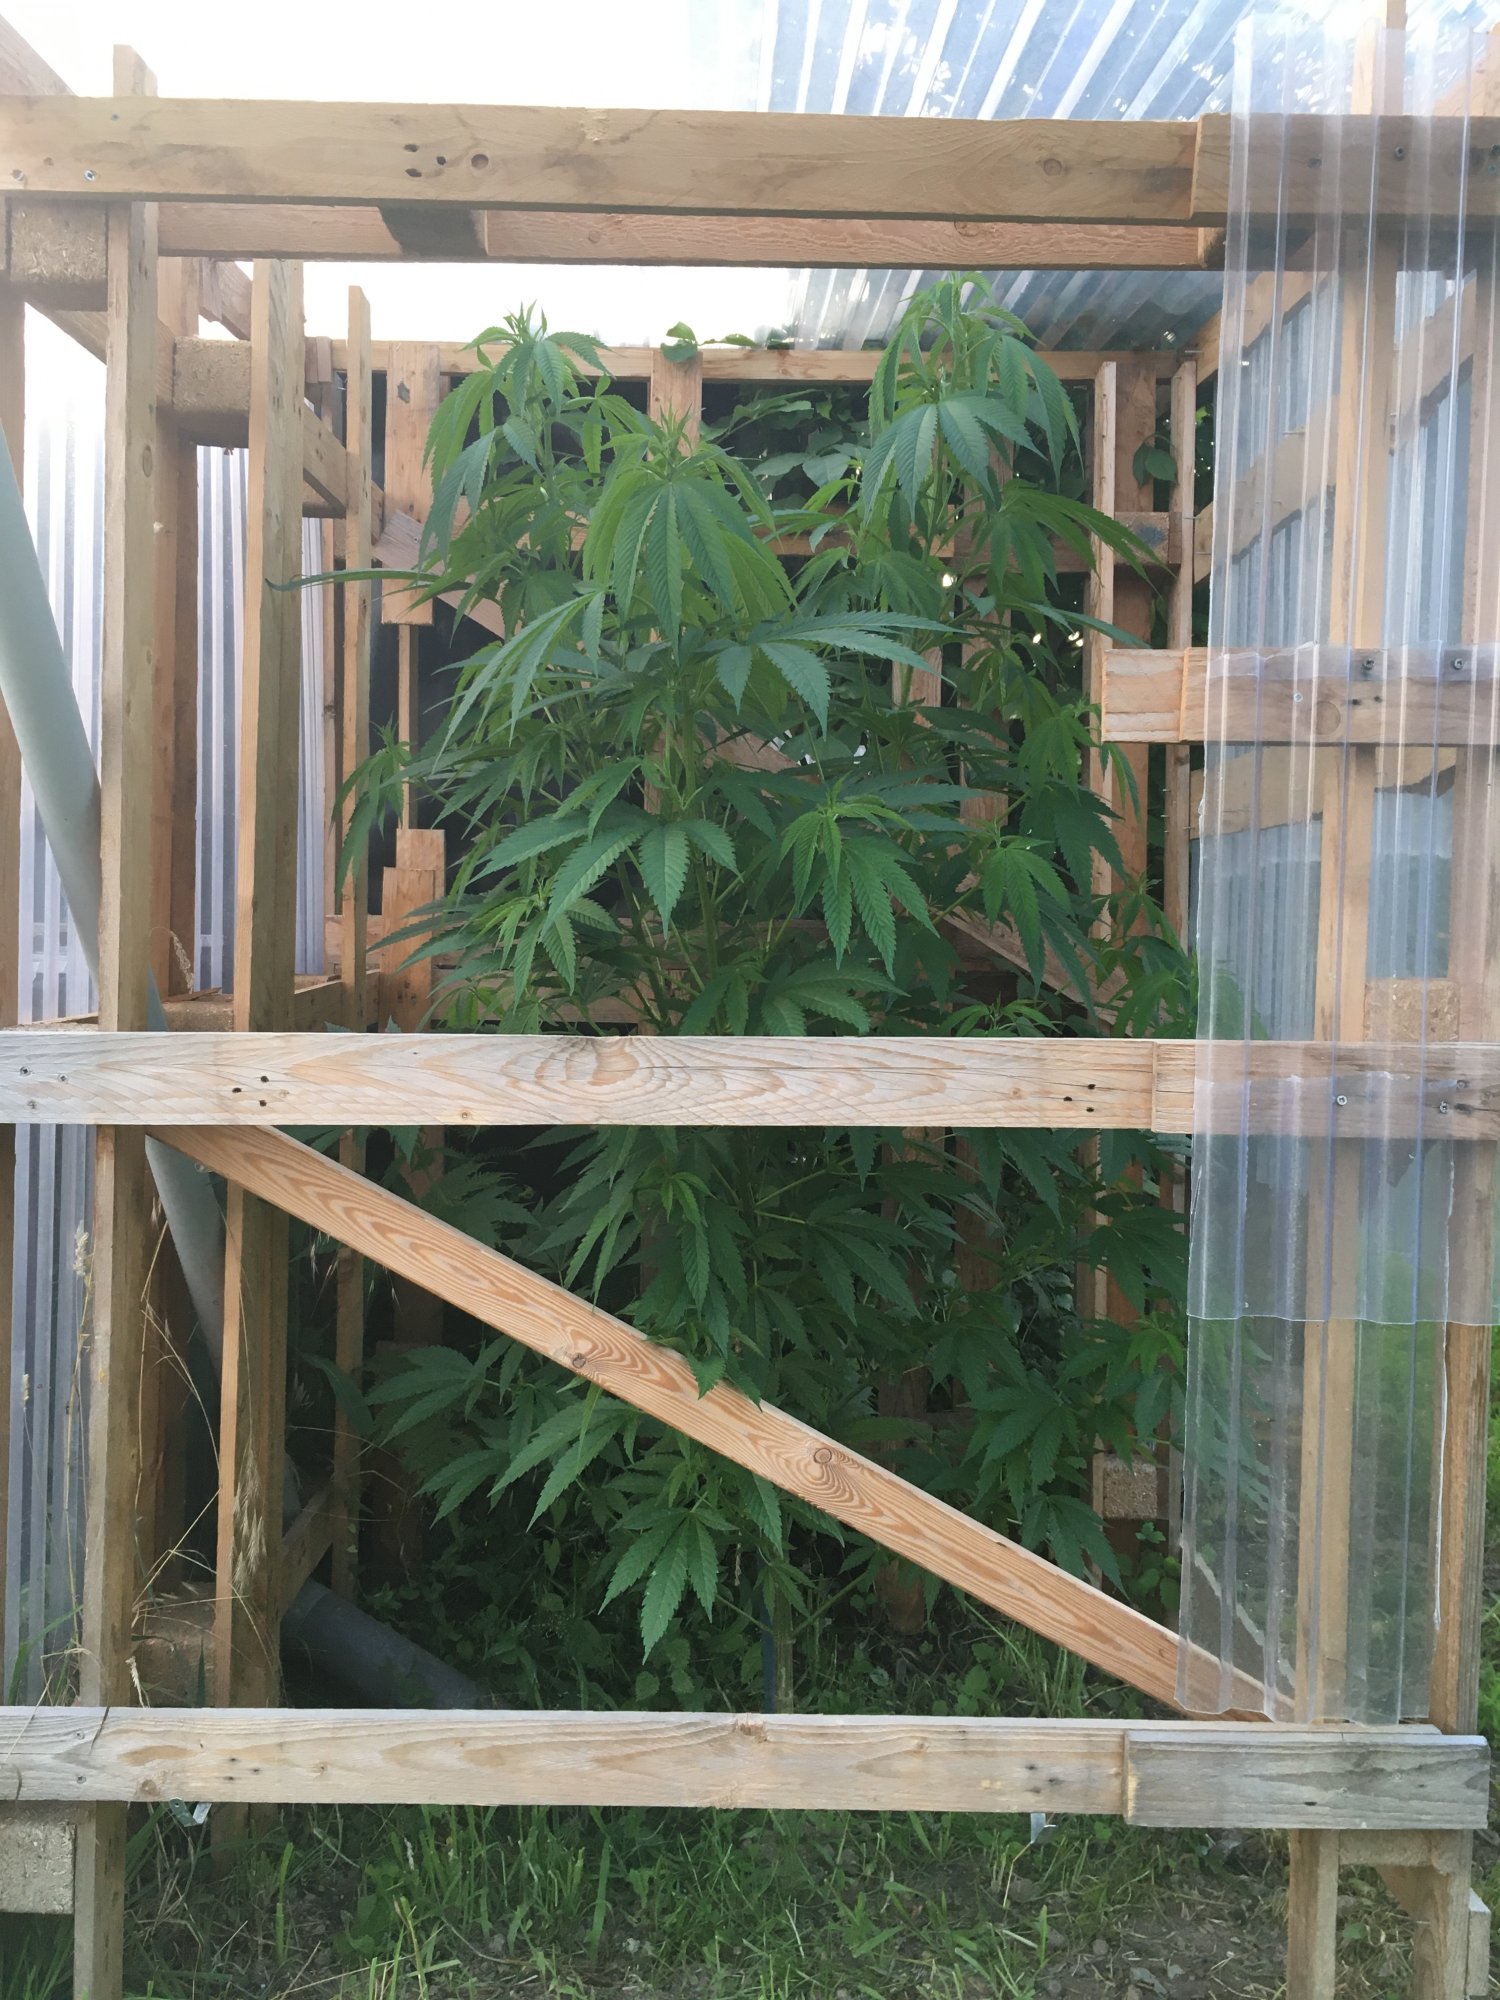 Chocolope growing too big for her home 3